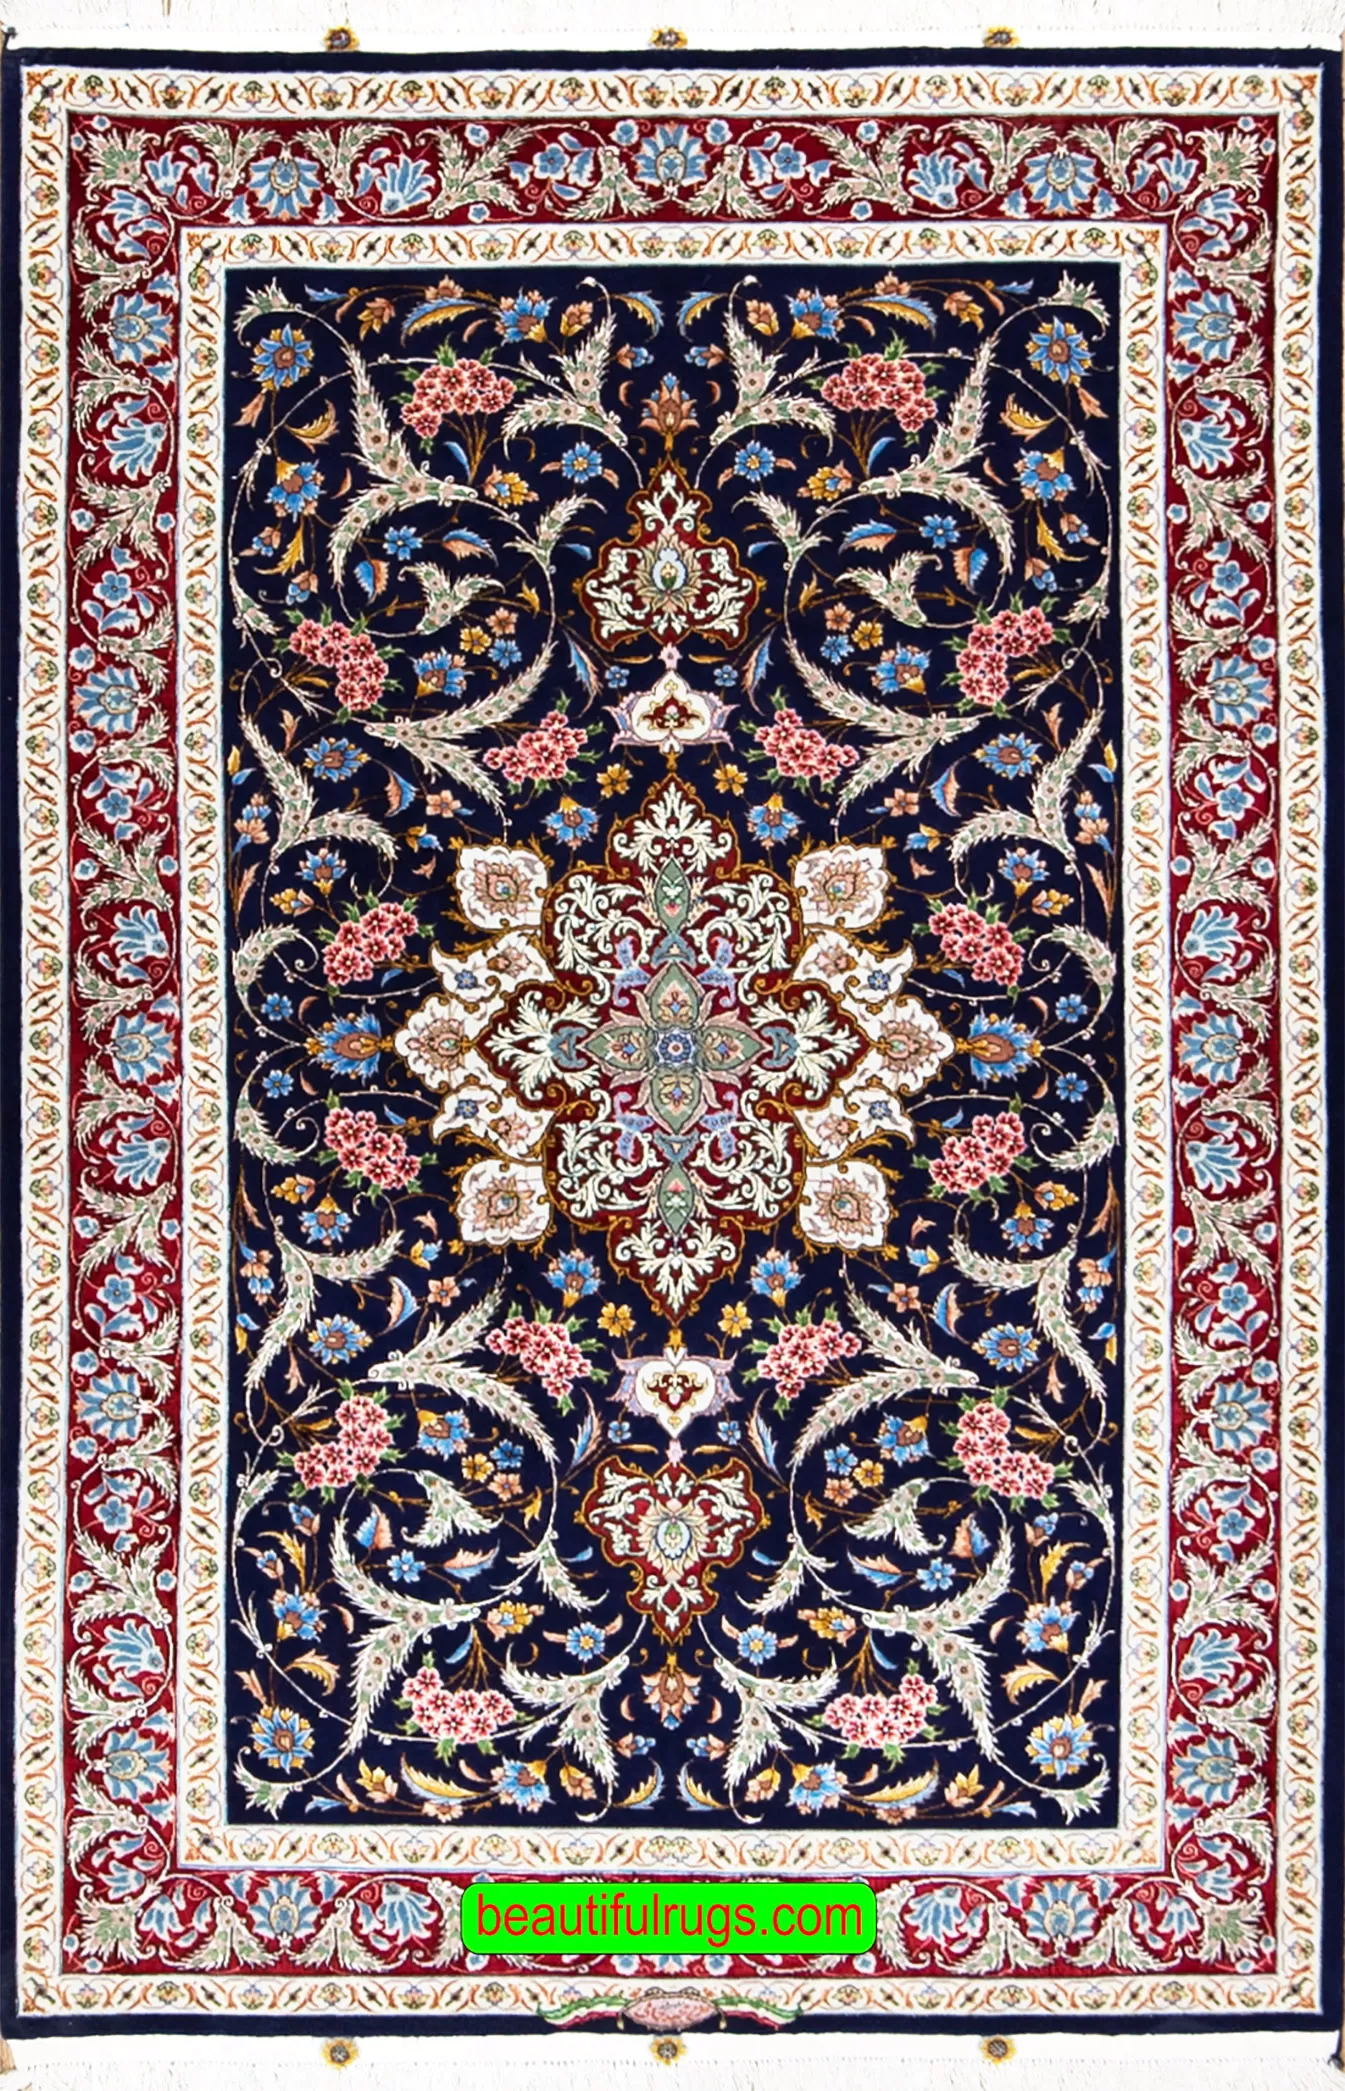 Gorgeous colorful Persian Tabriz silk wool rug, navy blue background. Size 3.10x6.1.